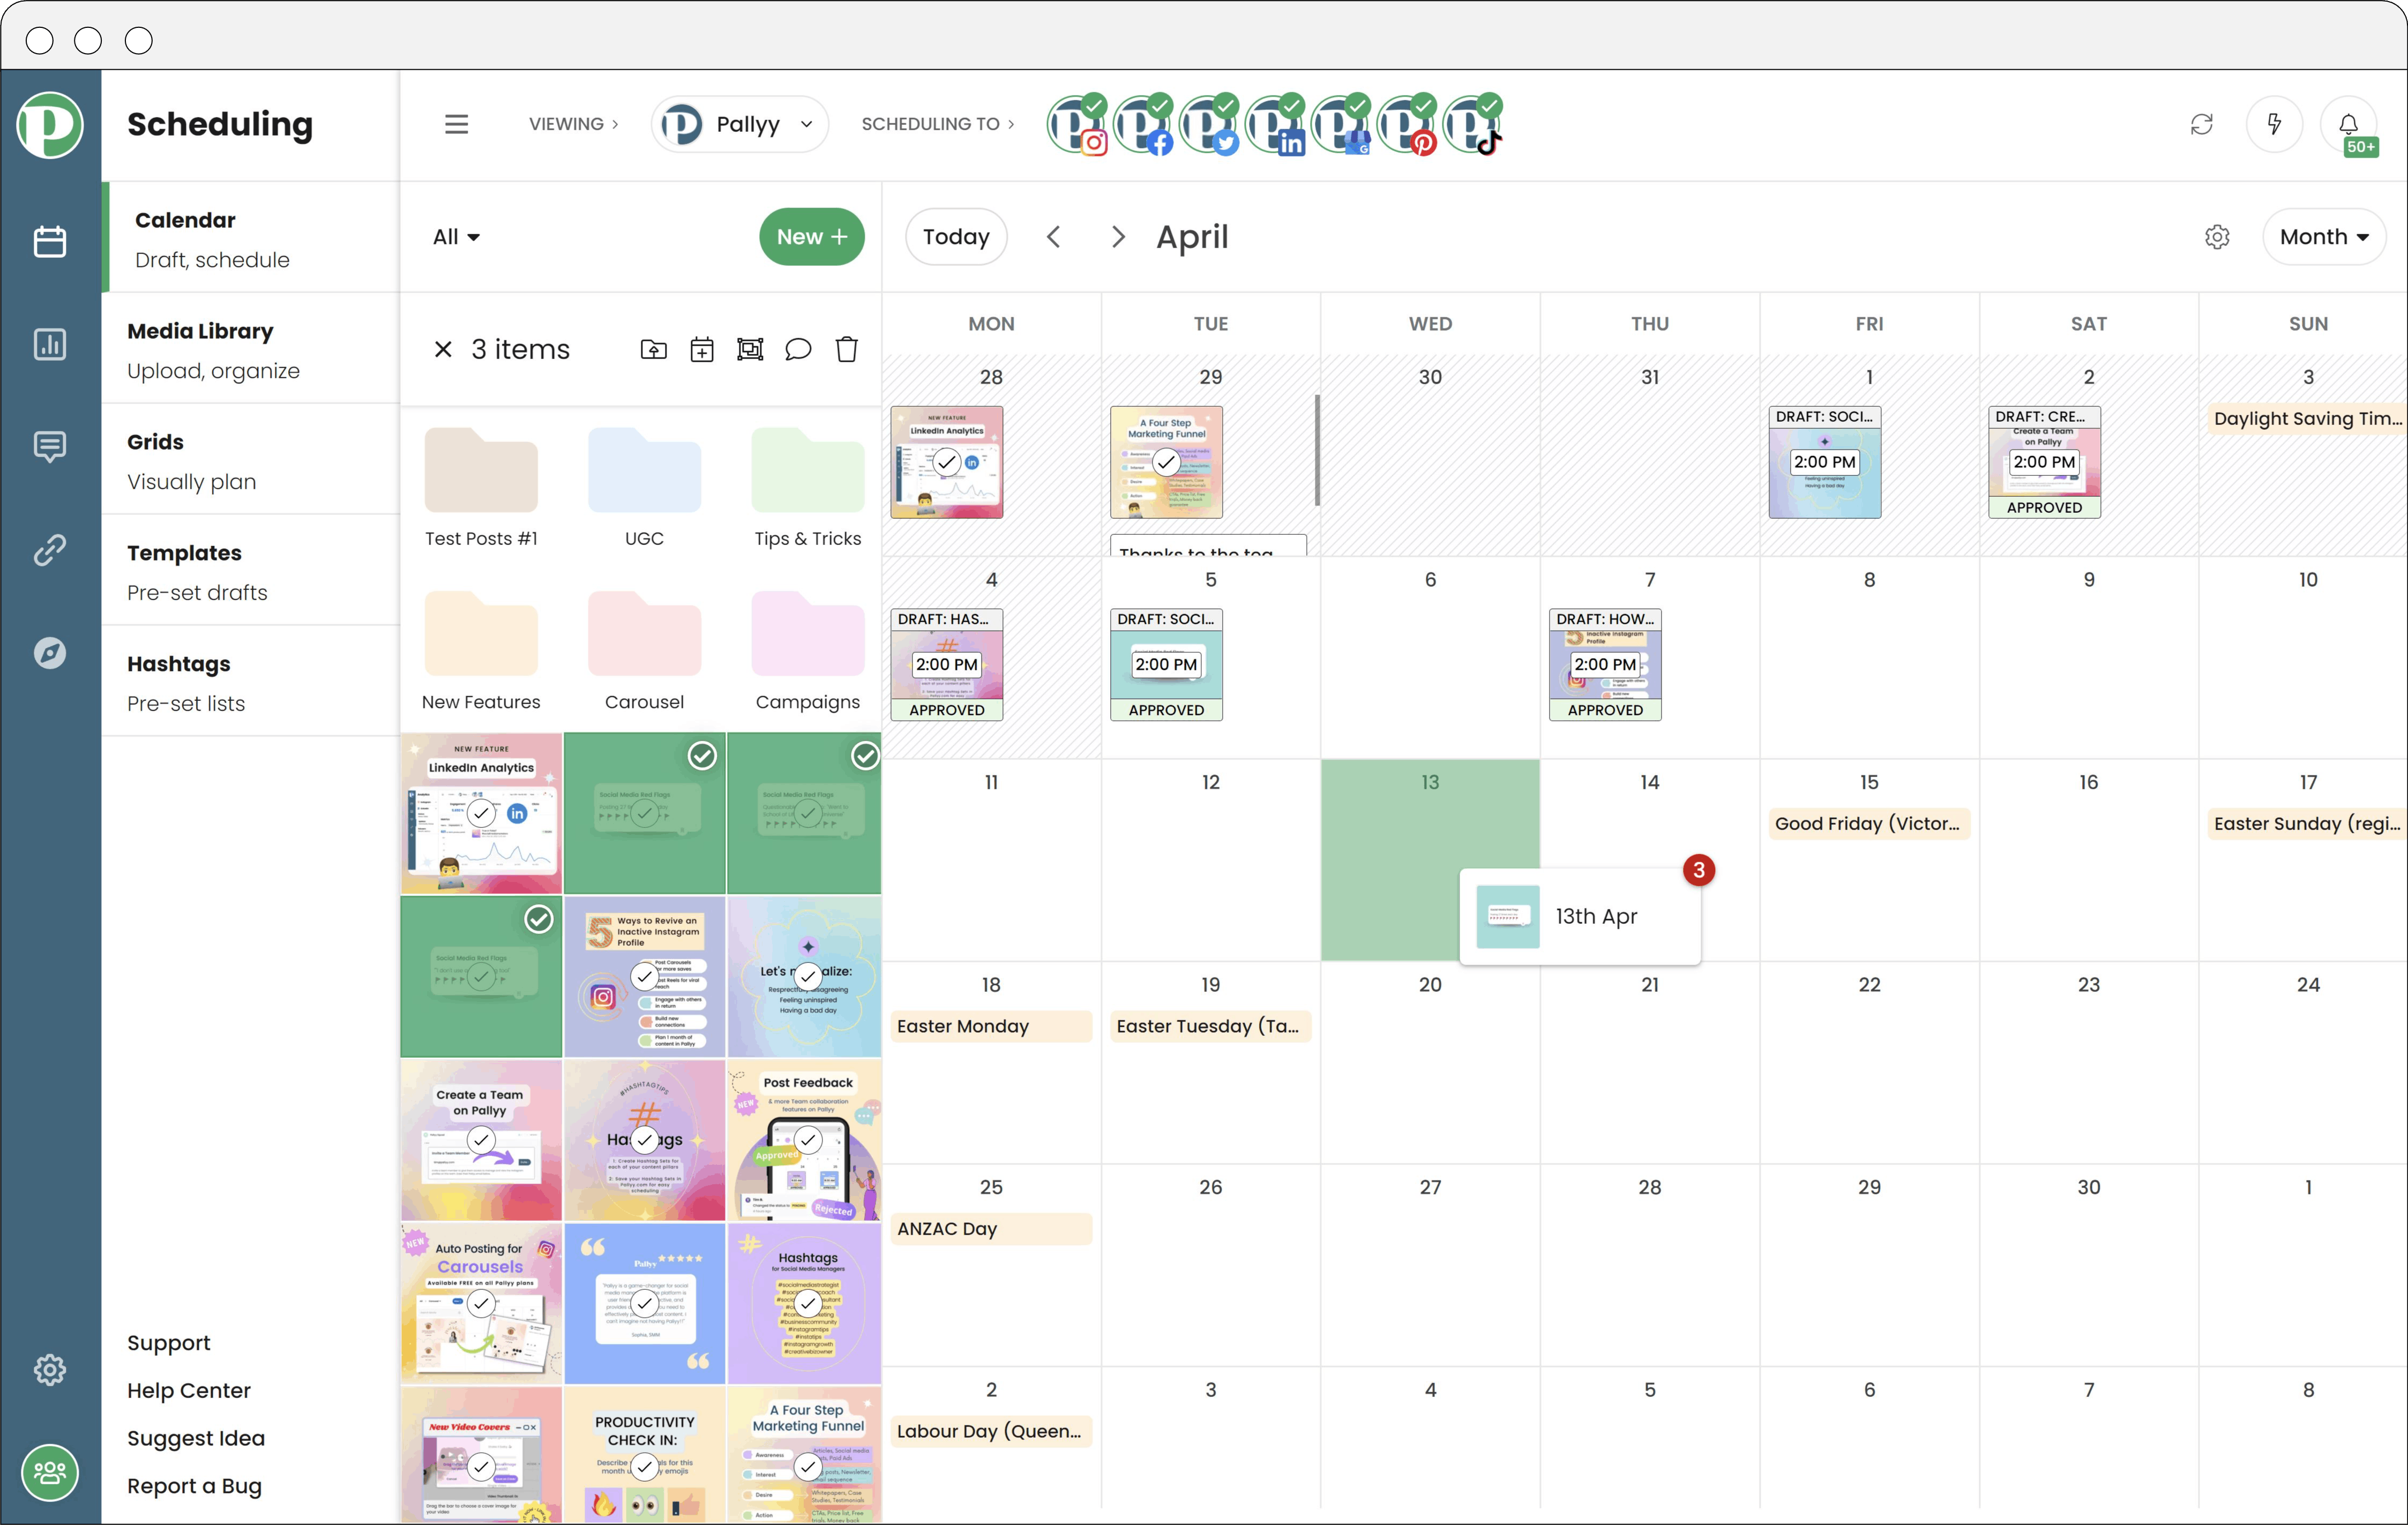 Dragging a post on Pallyys calendar to show how easy it is to save time scheduling.